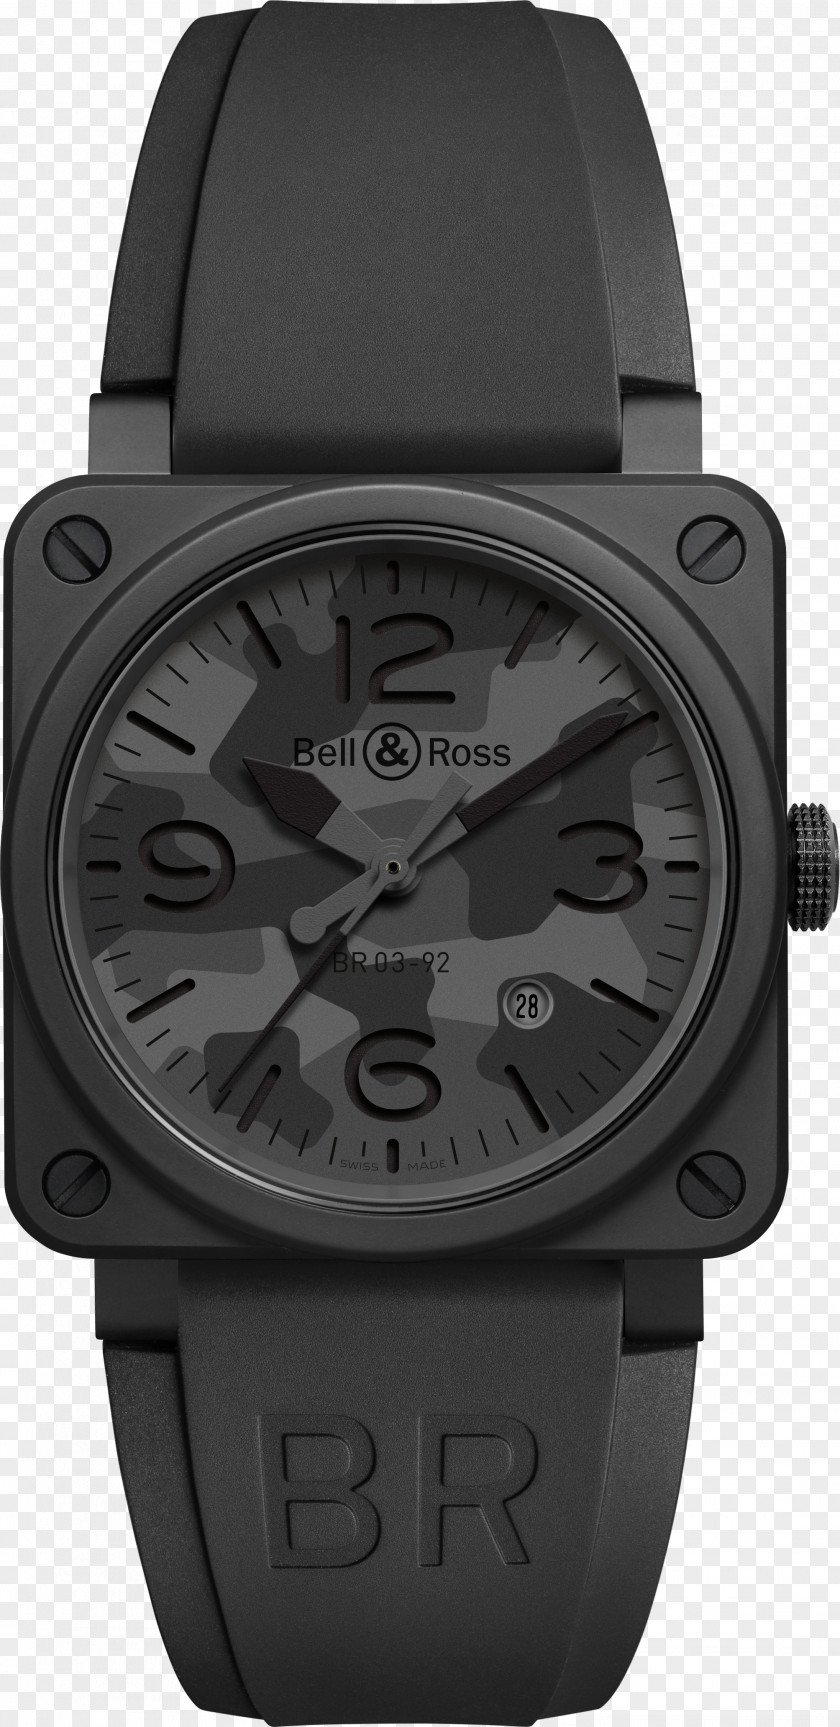 Singapore Universal Studio Amazon.com Bell & Ross Watchmaker Camouflage PNG